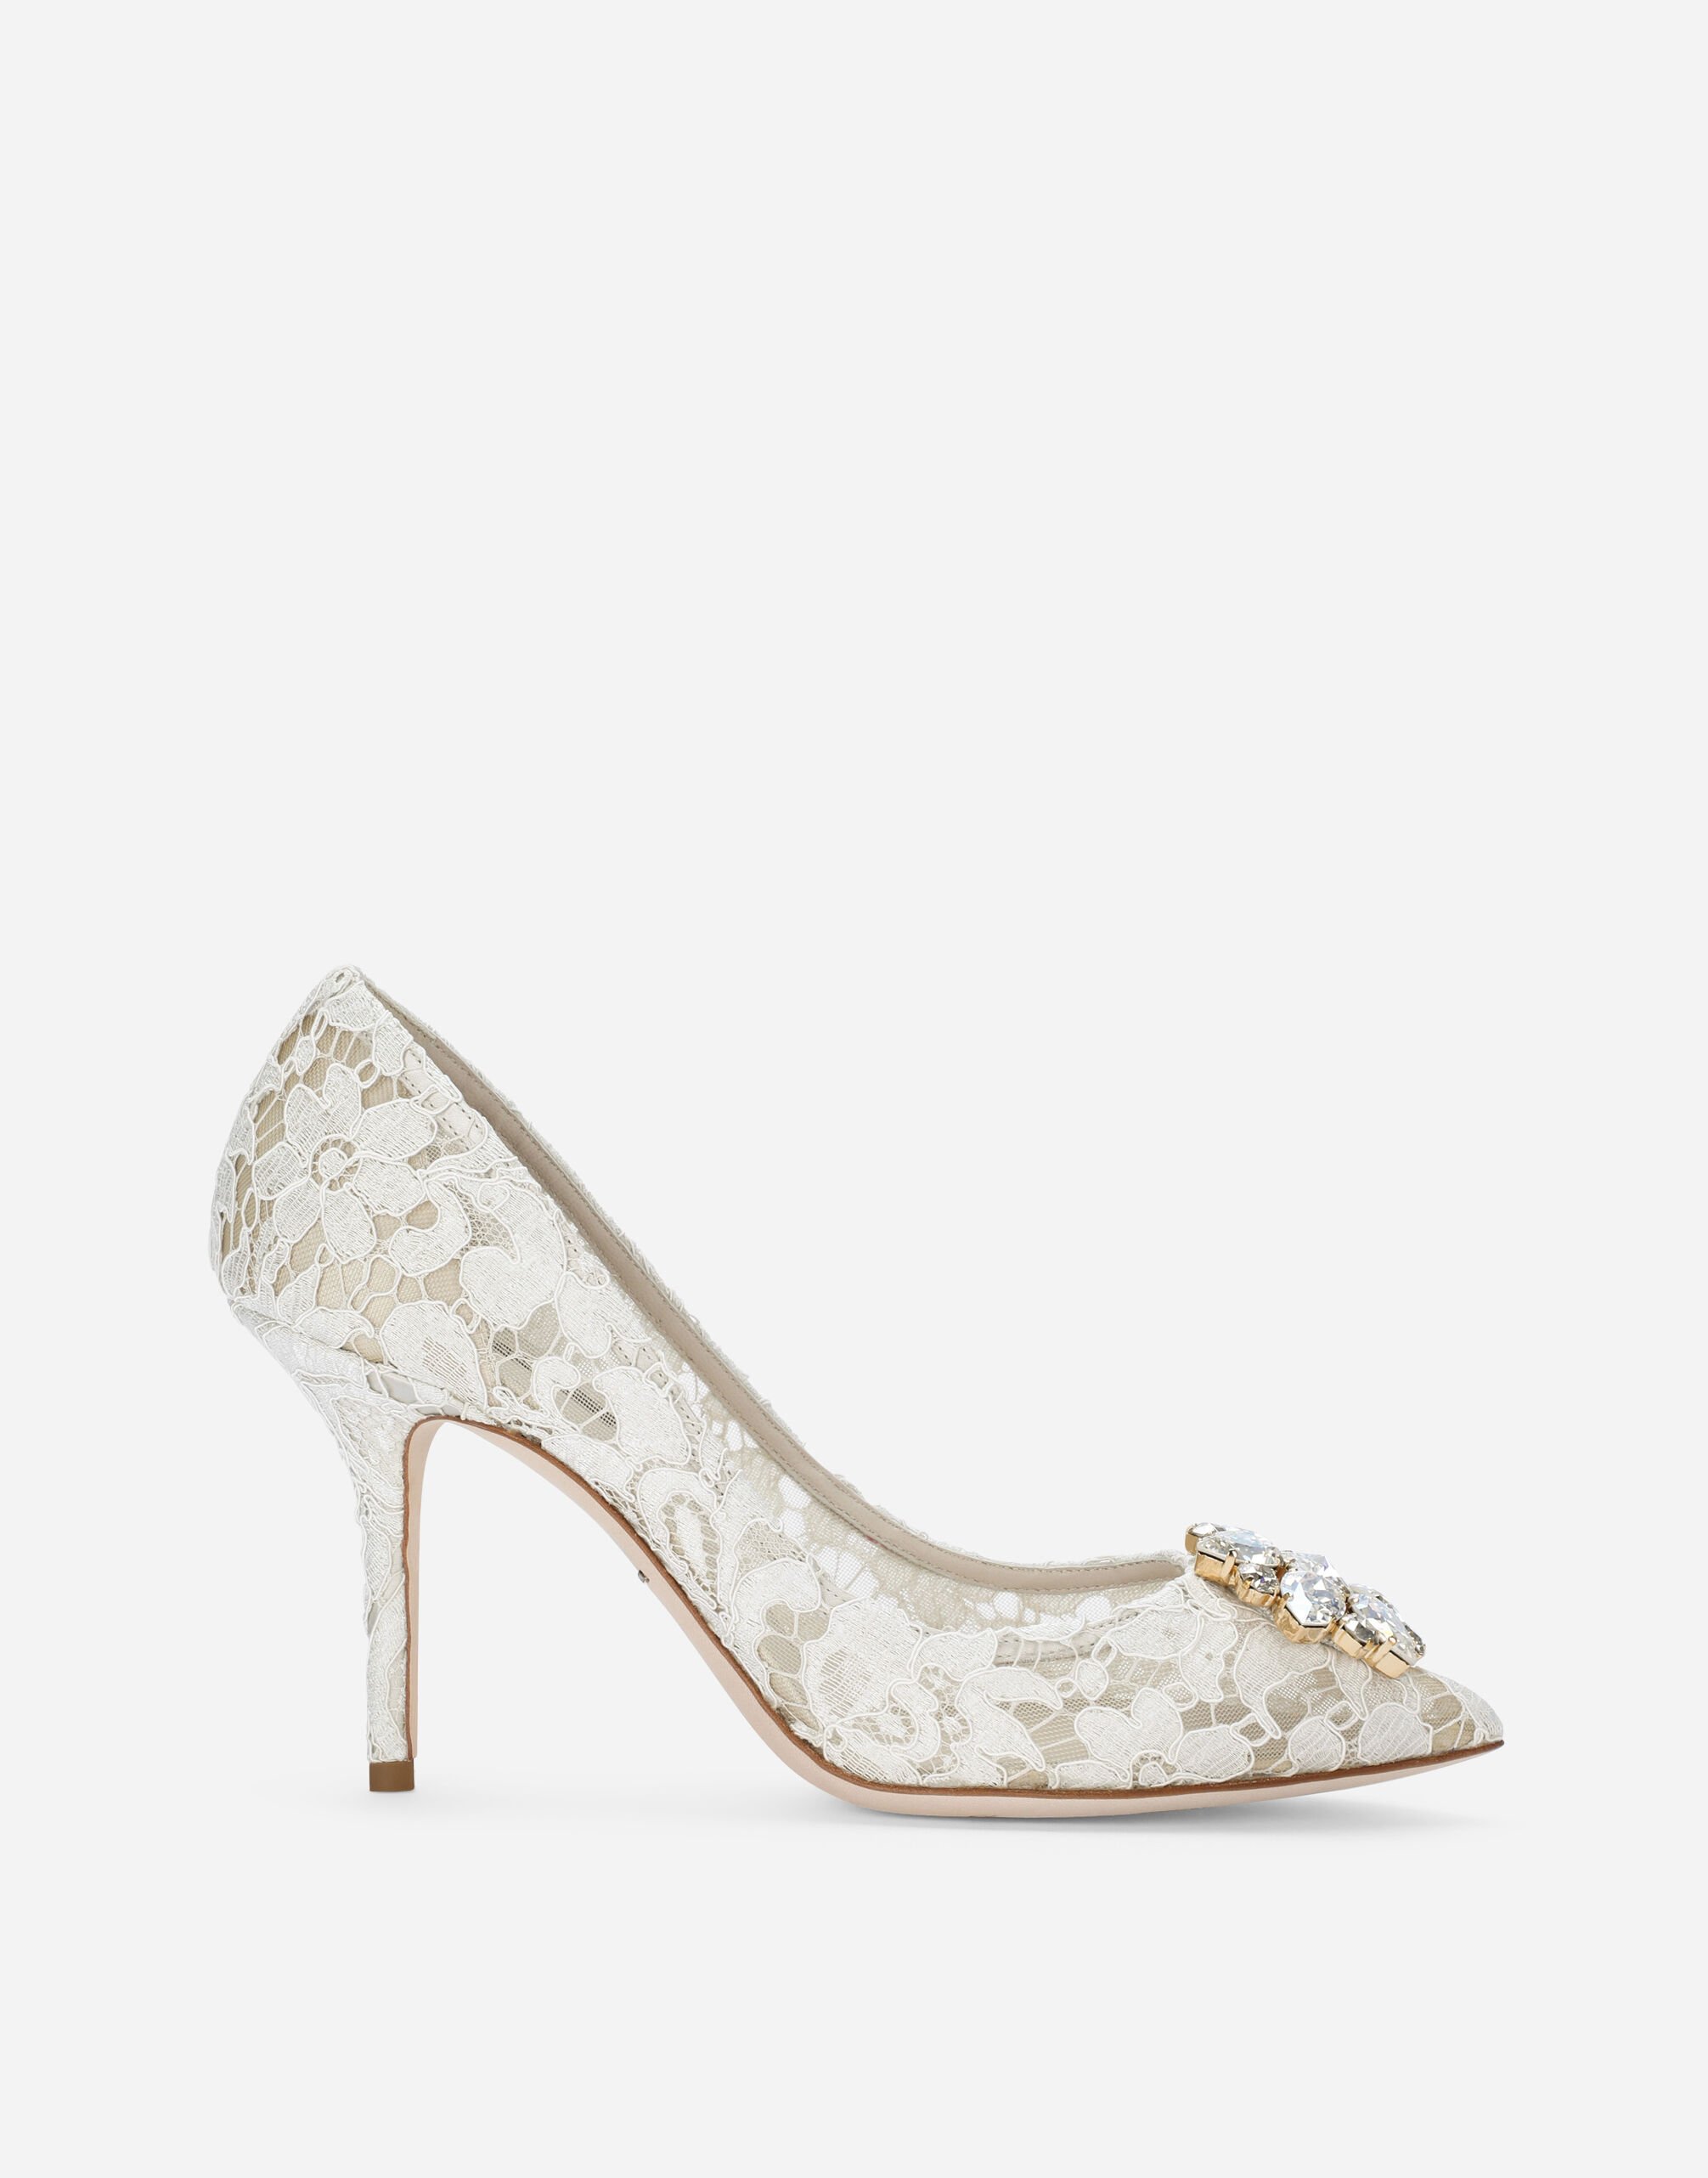 ${brand} Pump in Taormina lace with crystals ${colorDescription} ${masterID}